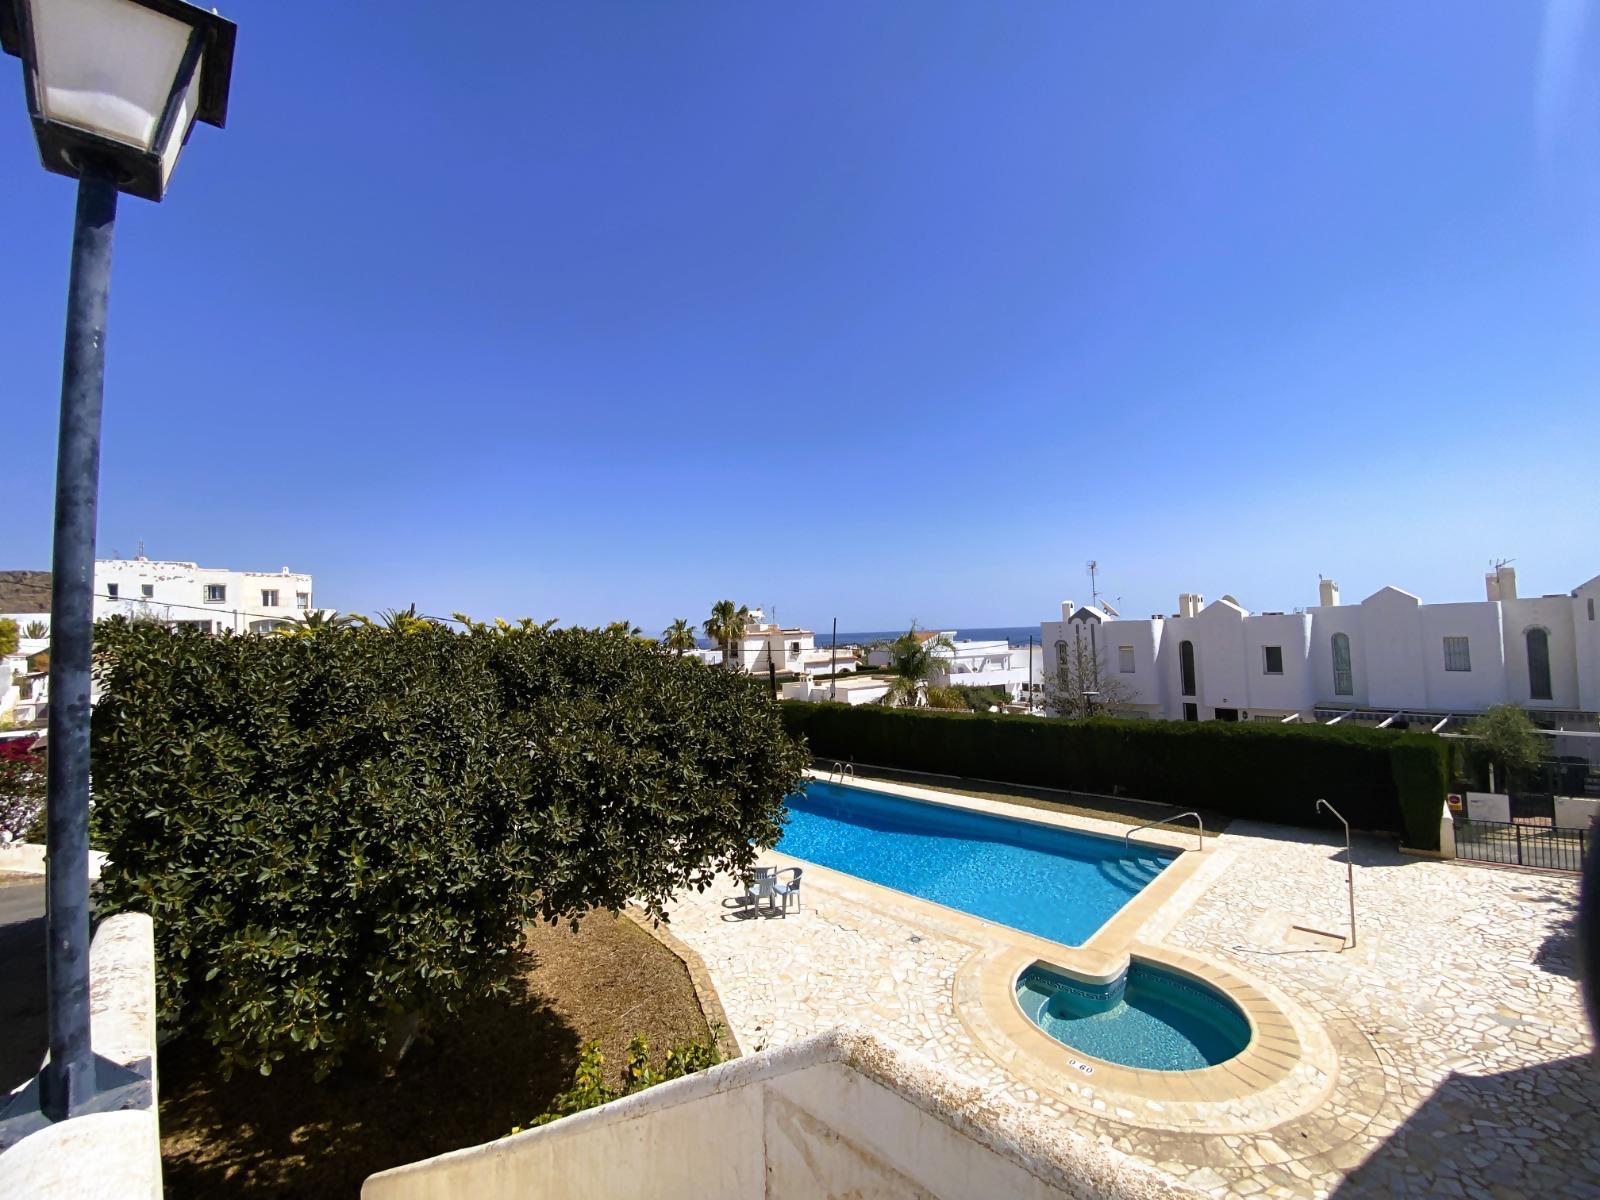 Modern and elegant 3 bedroom townhouse: Apartment for Rent in Mojácar, Almería